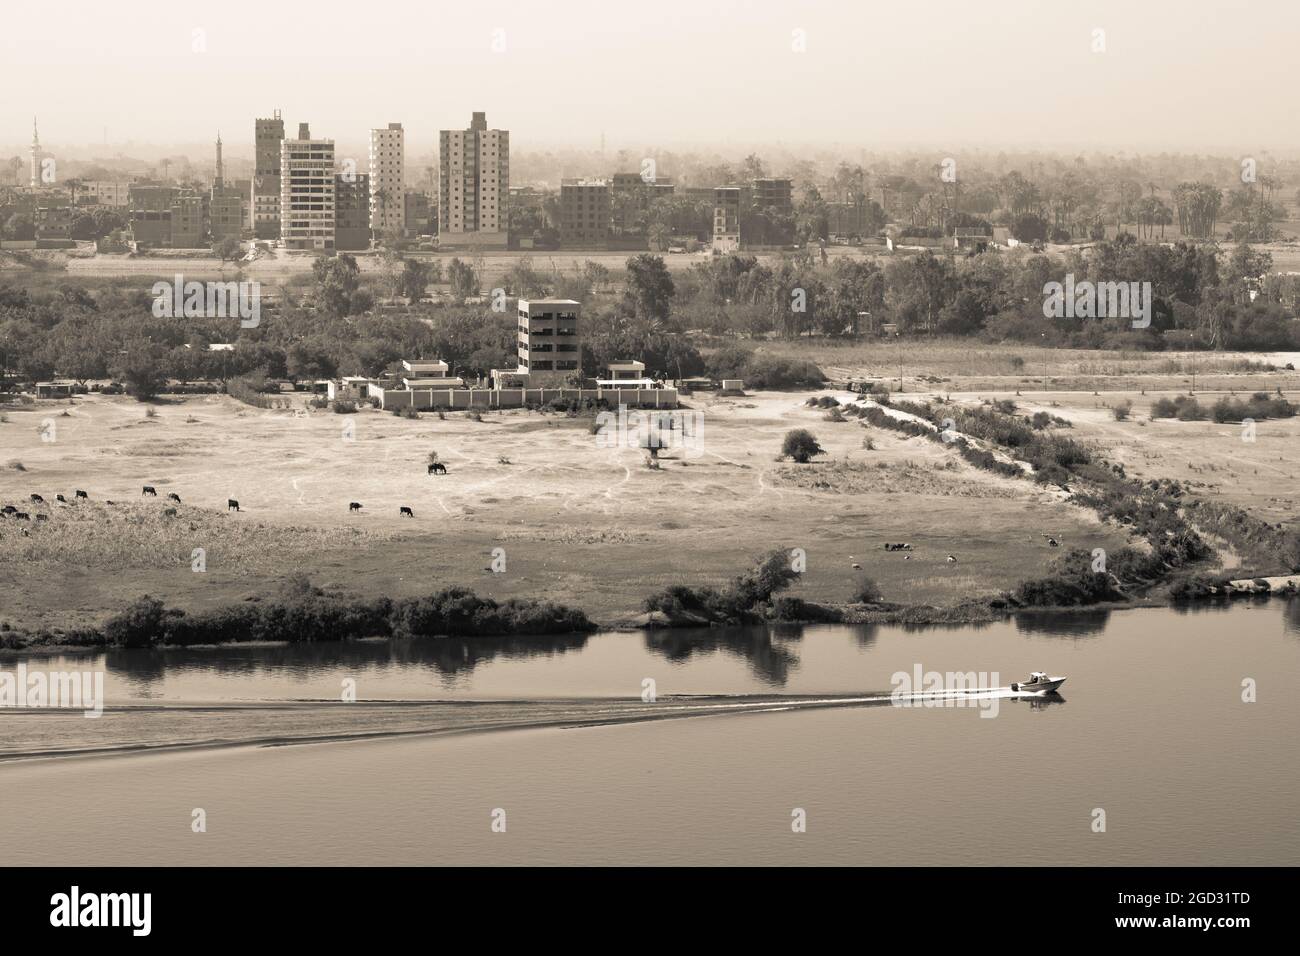 Vintage photo of Sohag city showing the Nile river and some buildings on a grayscale Stock Photo